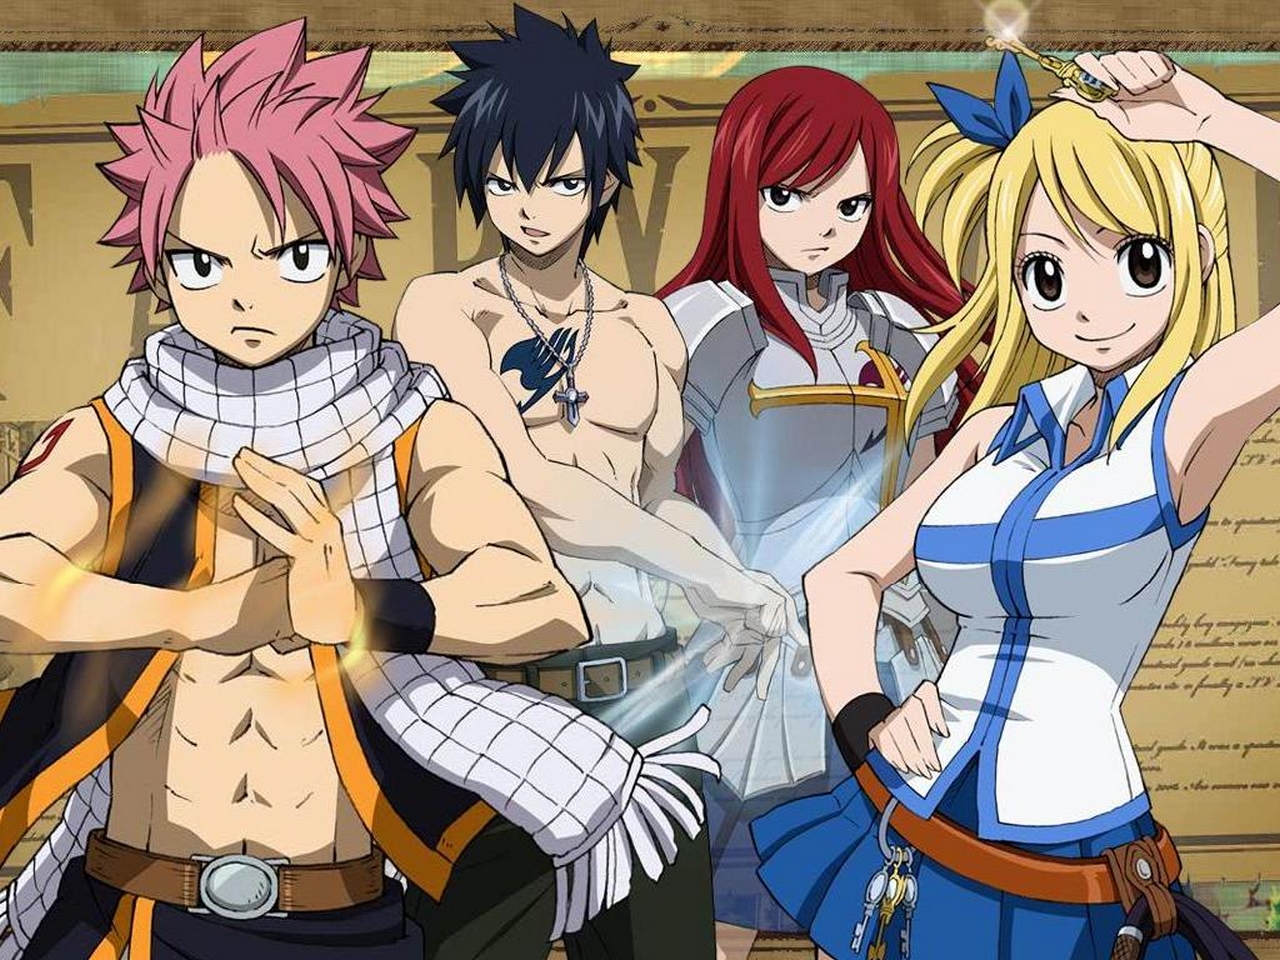 hinh nen fairy tail 13 - wallpaper free download